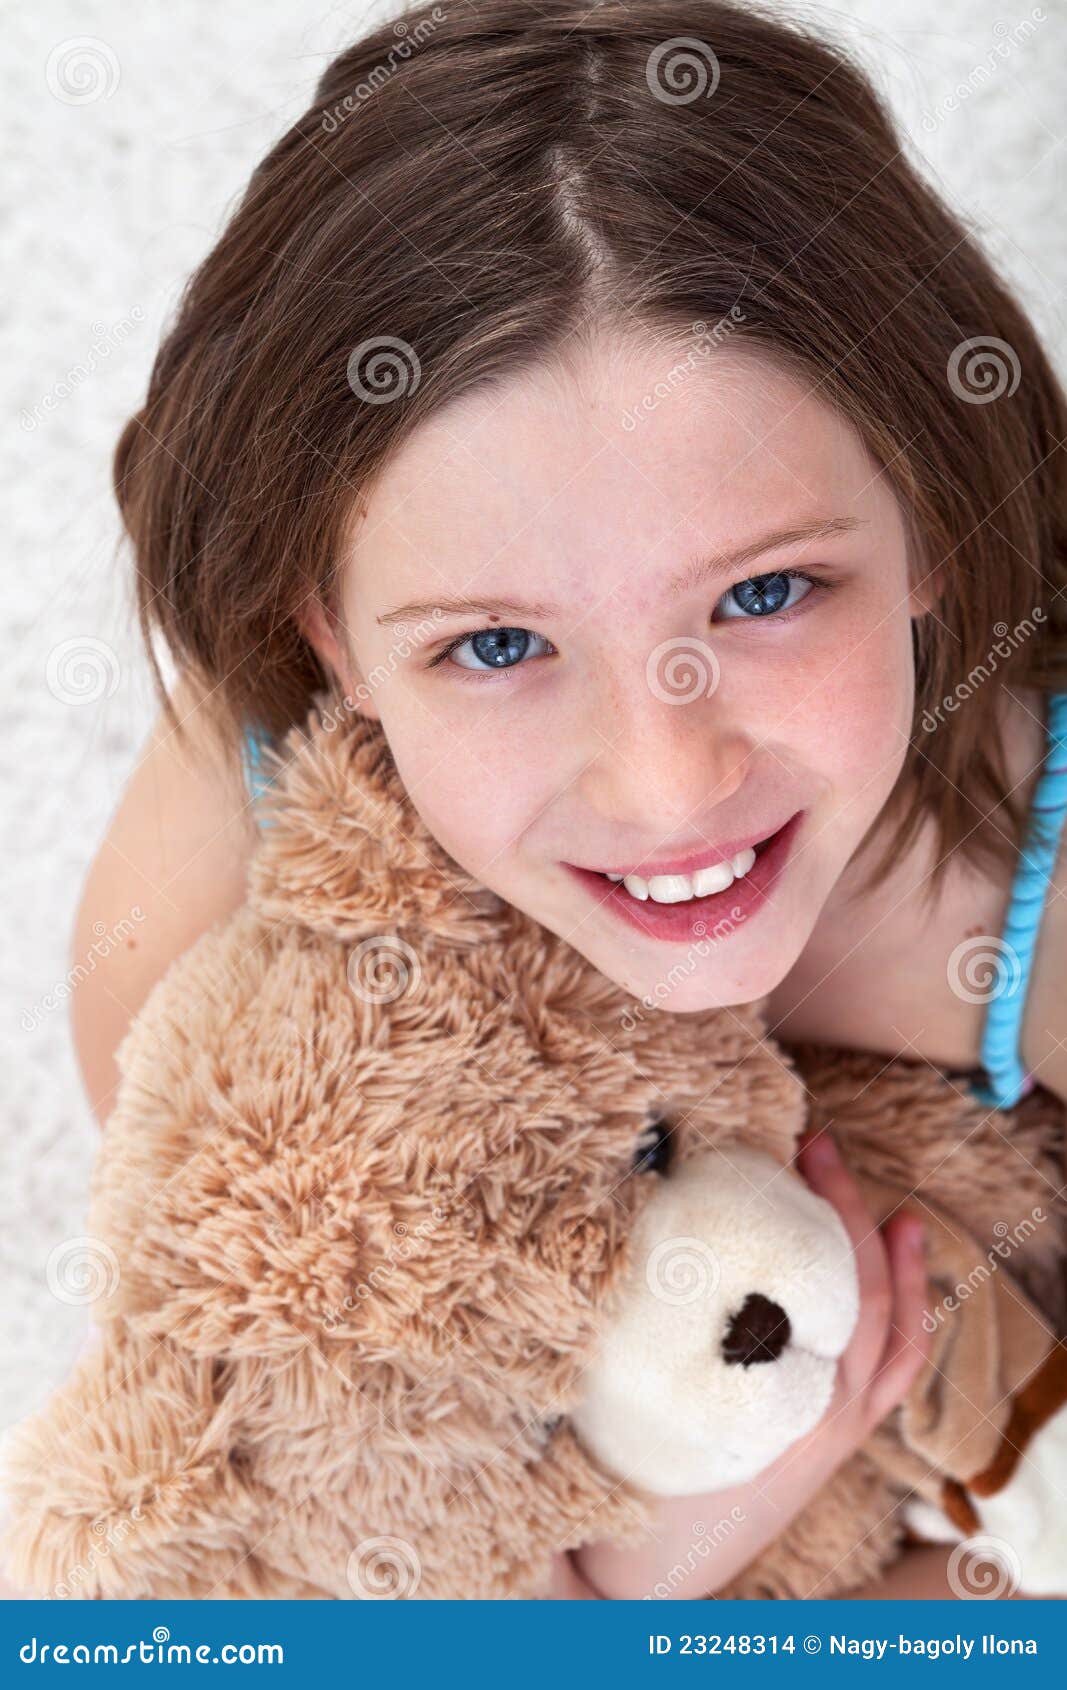 Young girl with teddy bear stock photo. Image of people - 23248314